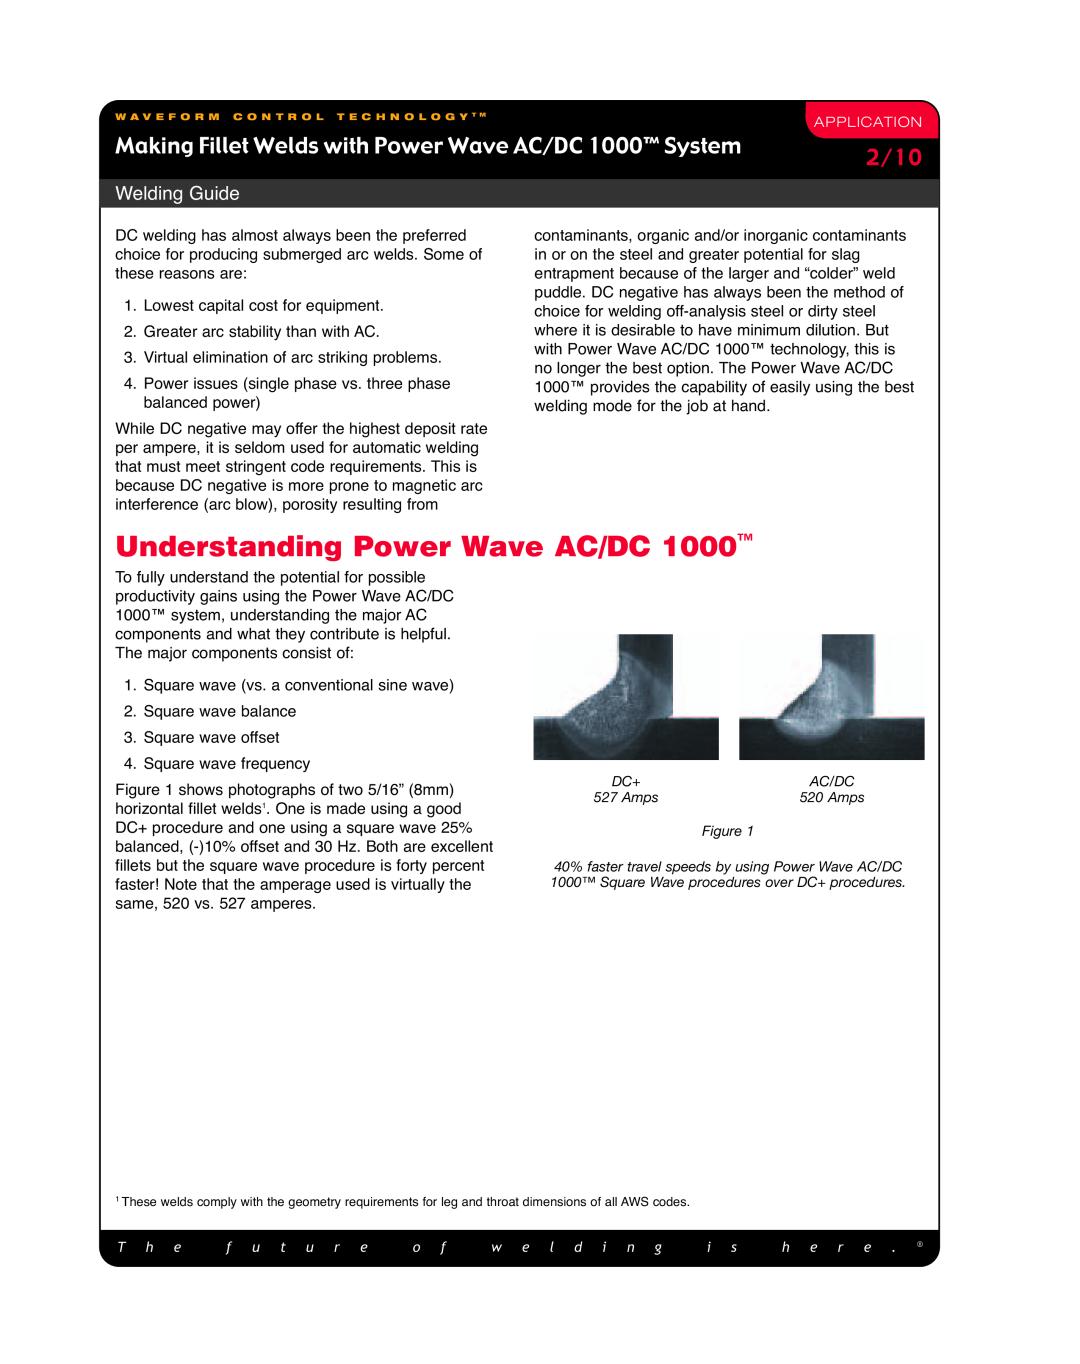 Lincoln Electric manual Understanding Power Wave AC/DC, Making Fillet Welds with Power Wave AC/DC 1000 System, 2/10 